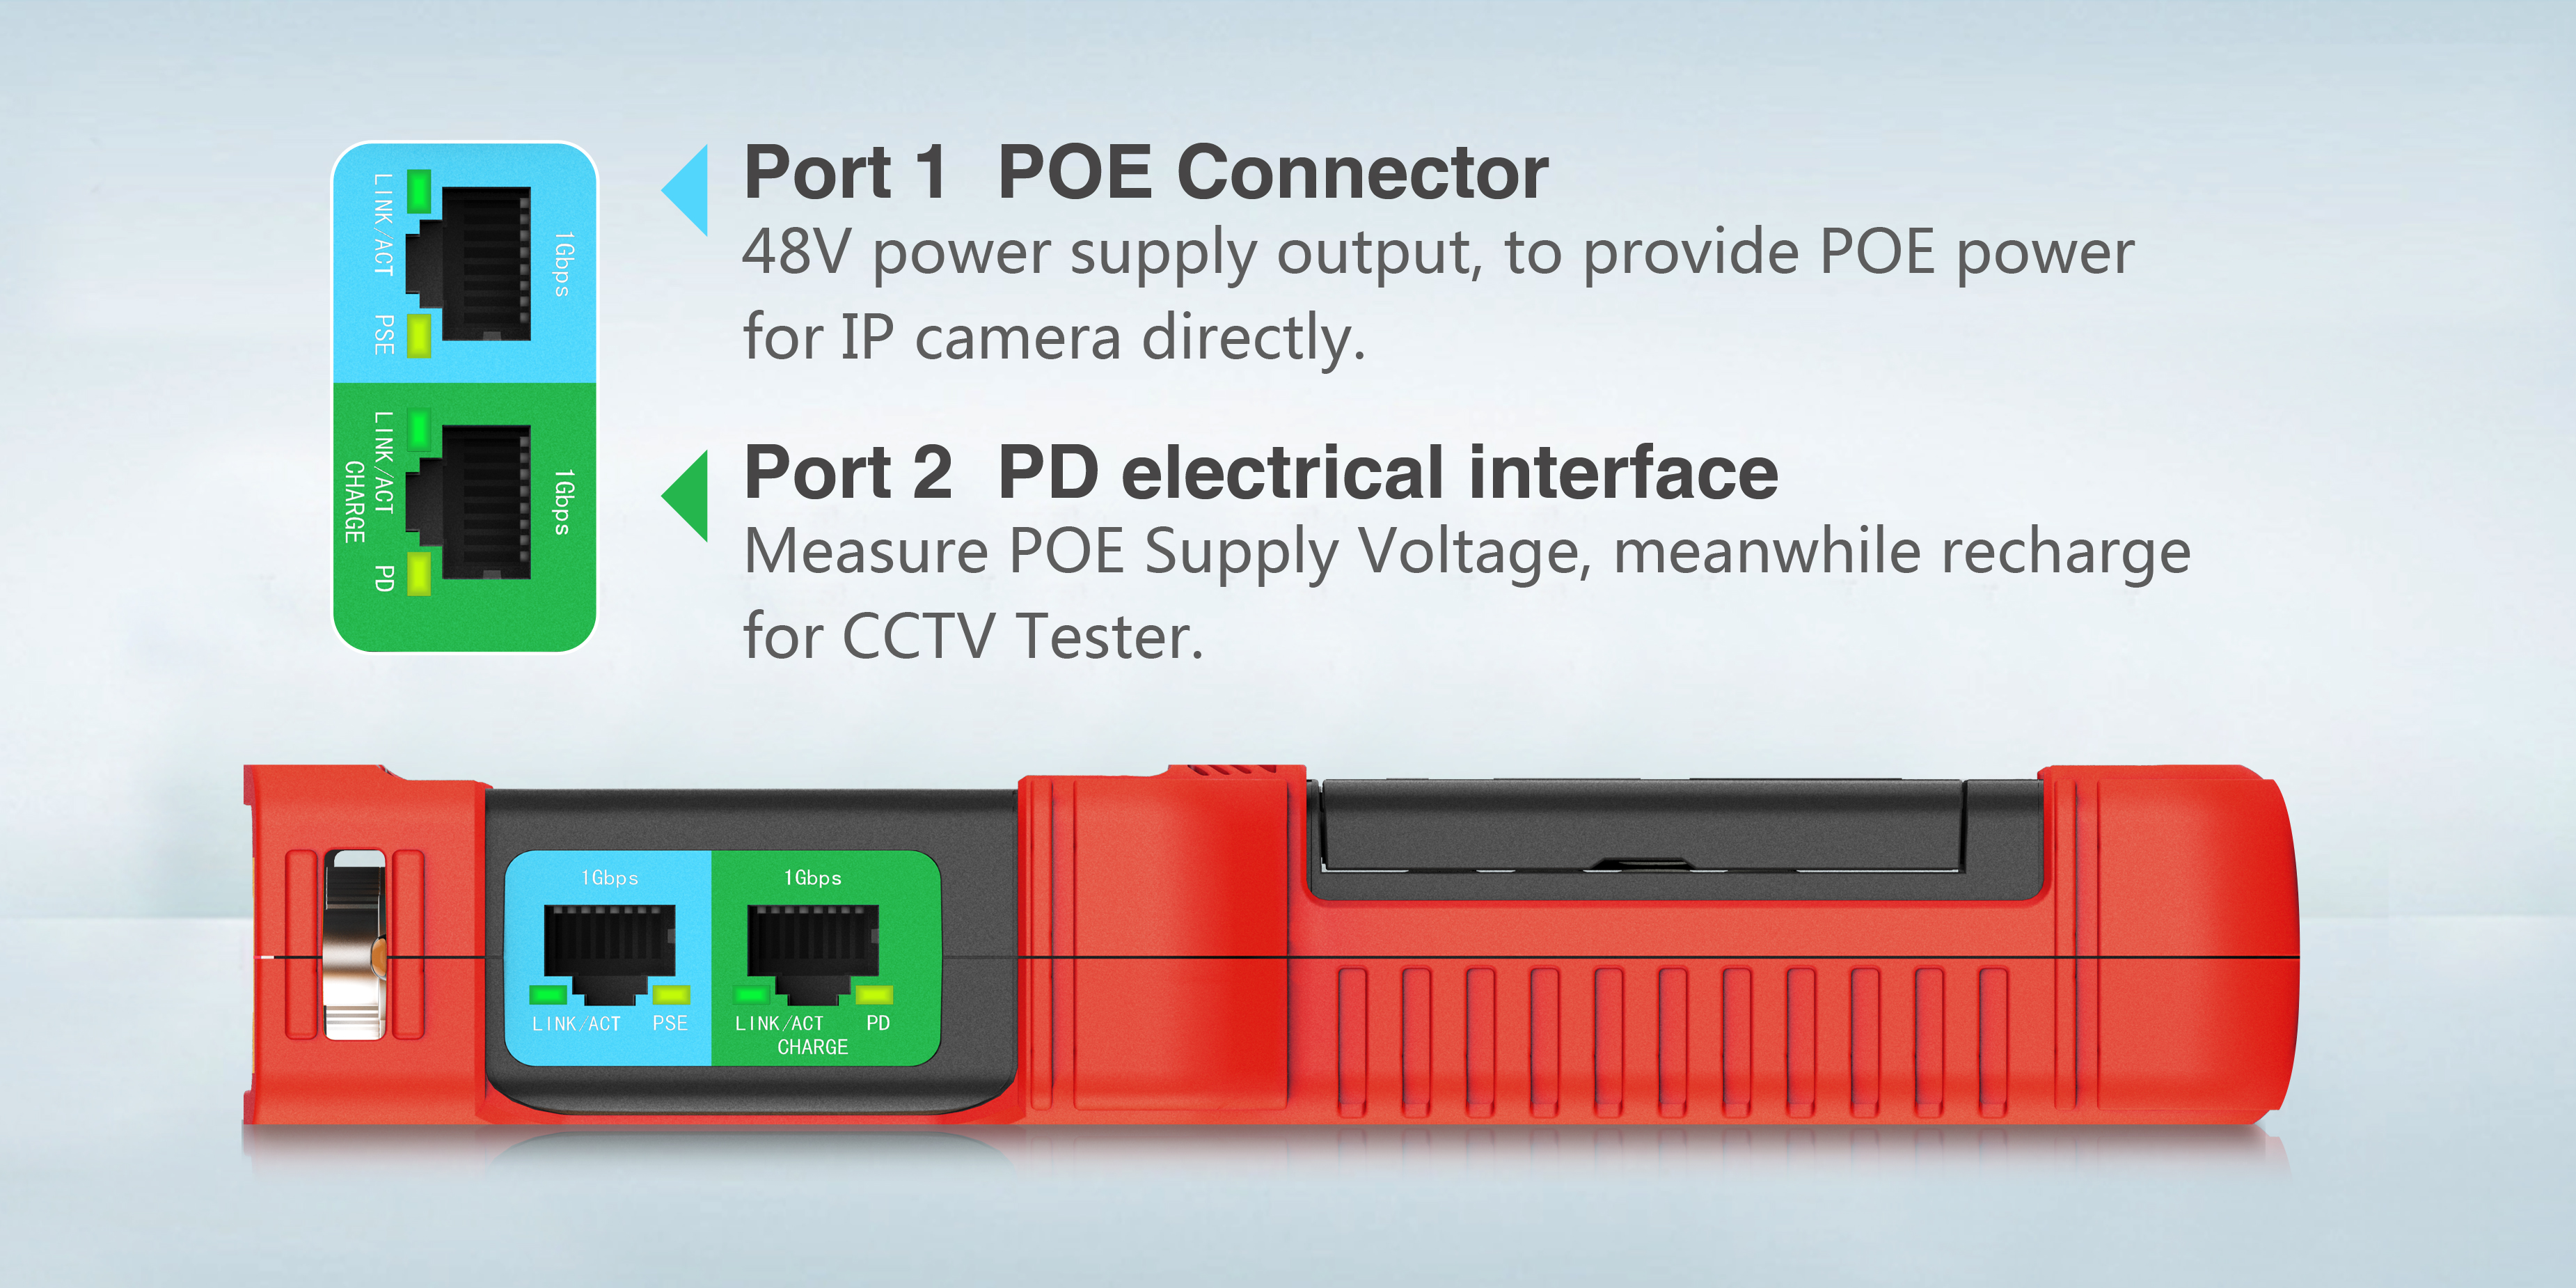 POE connector & PD electrical interface